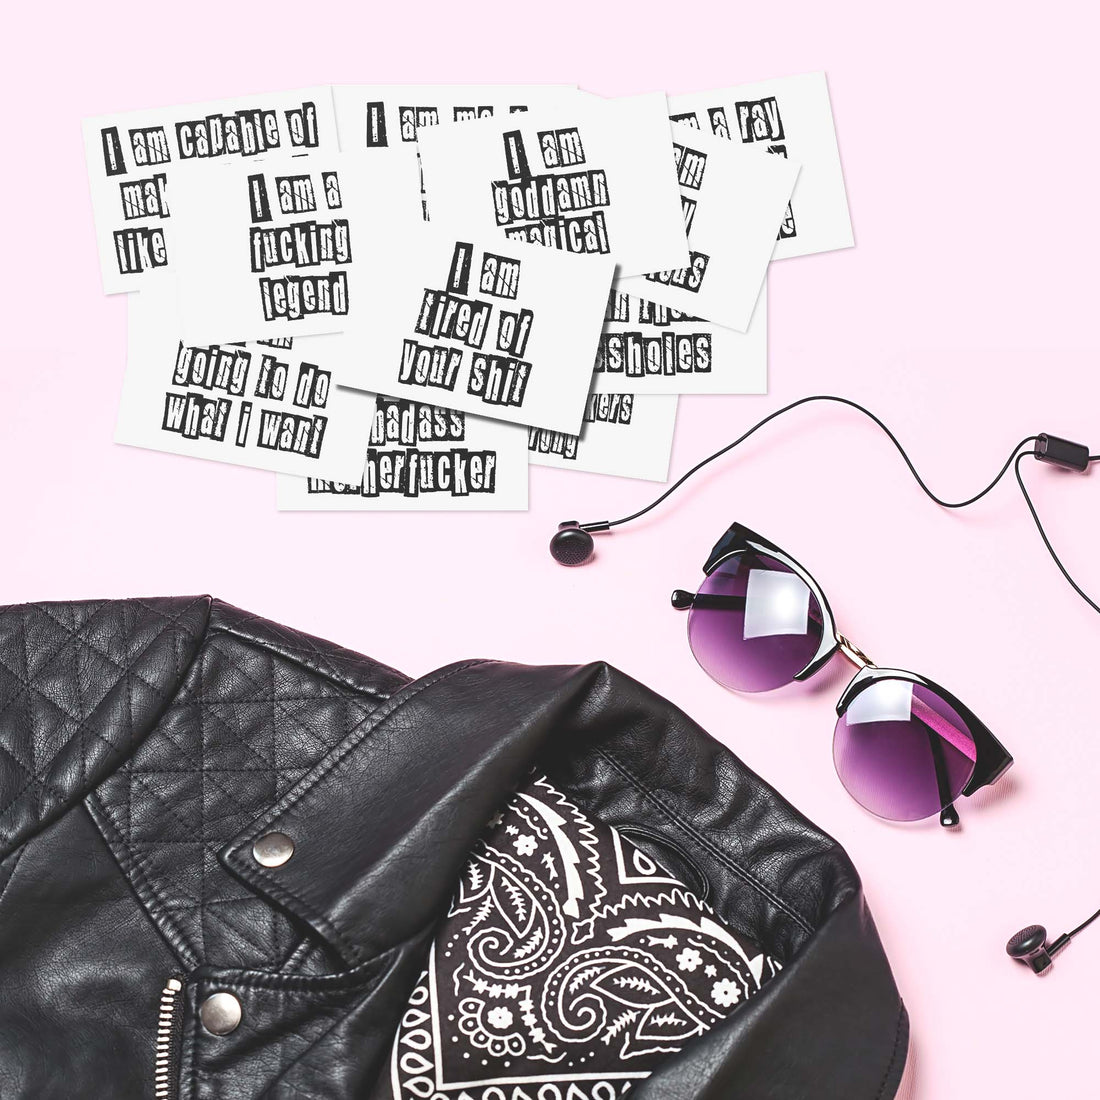 Sweary Affirmation Cards Lying next to a leather jacket and sunglasses